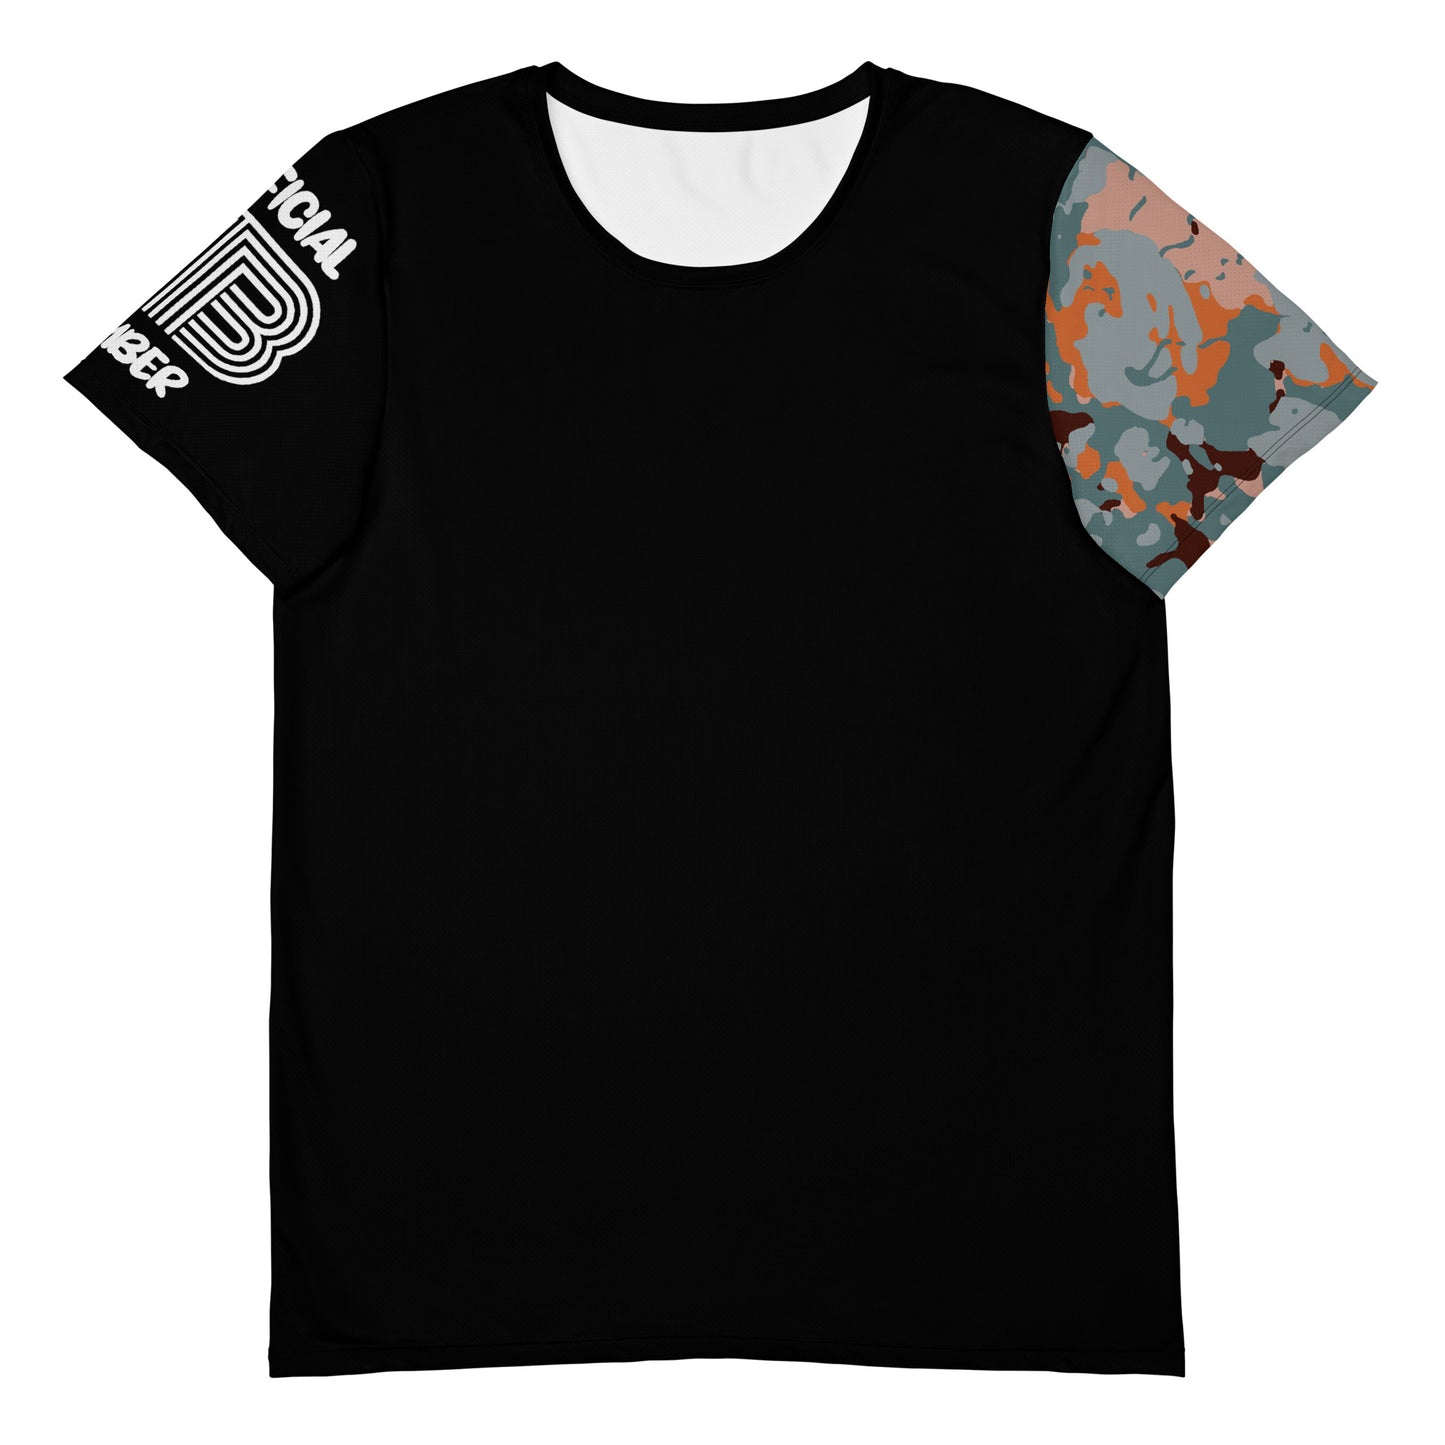 Official Members Cameo Compression Shirt